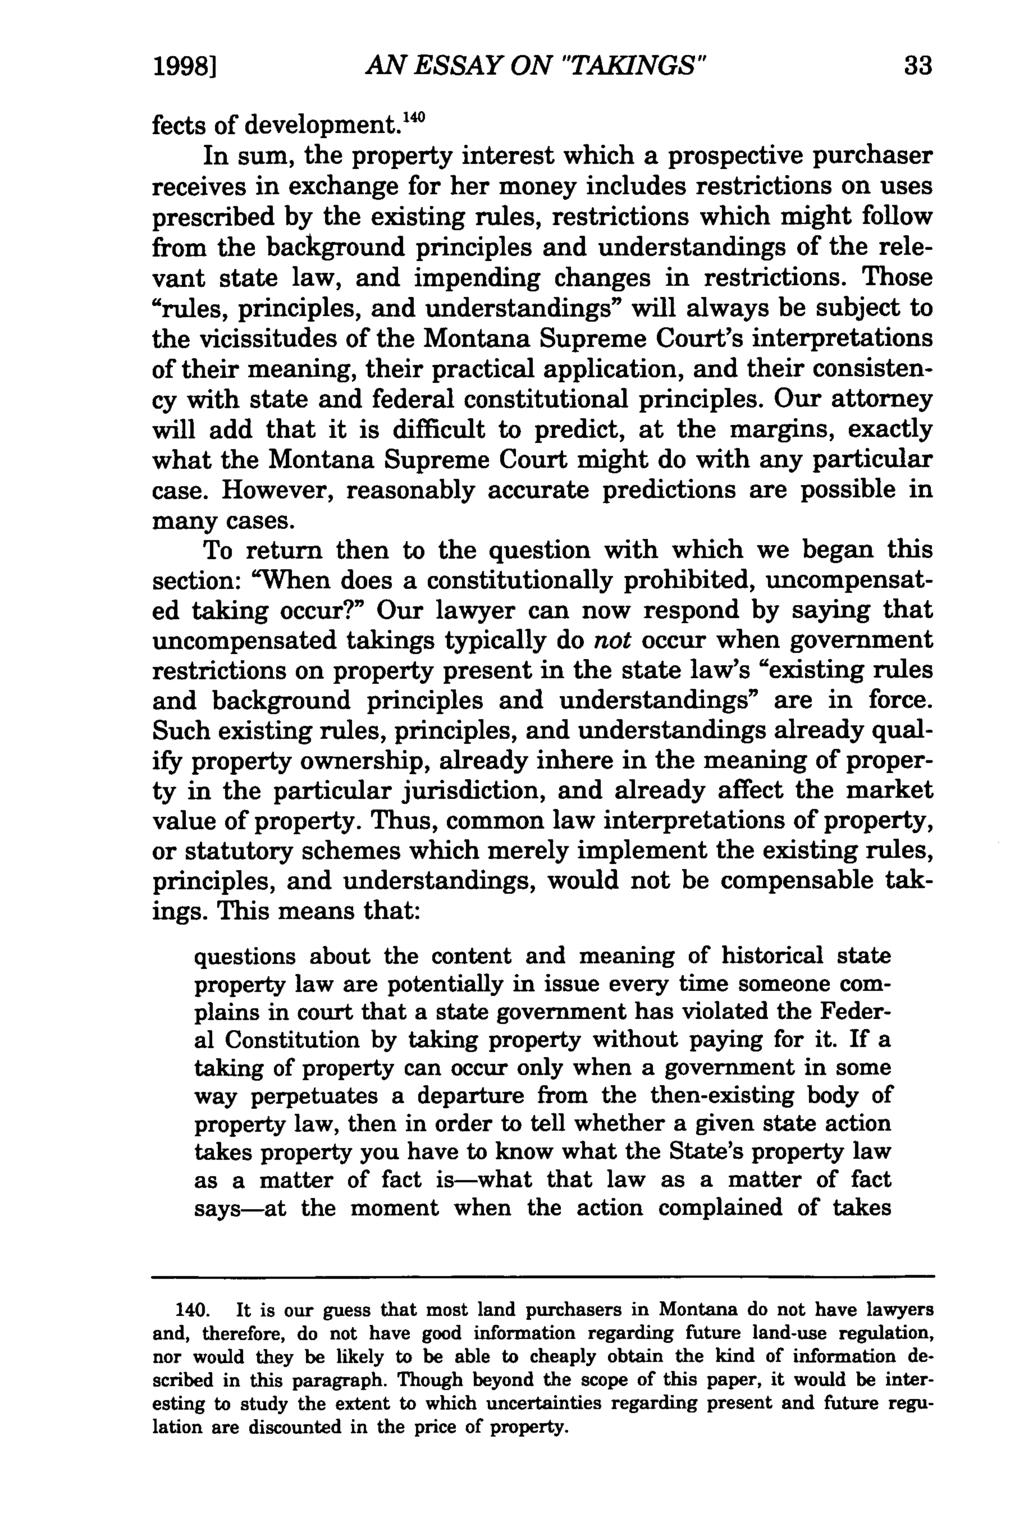 1998] Clifford AN ESSAY and Huff: An ON Essay "TAKINGS" on Takings fects of development.